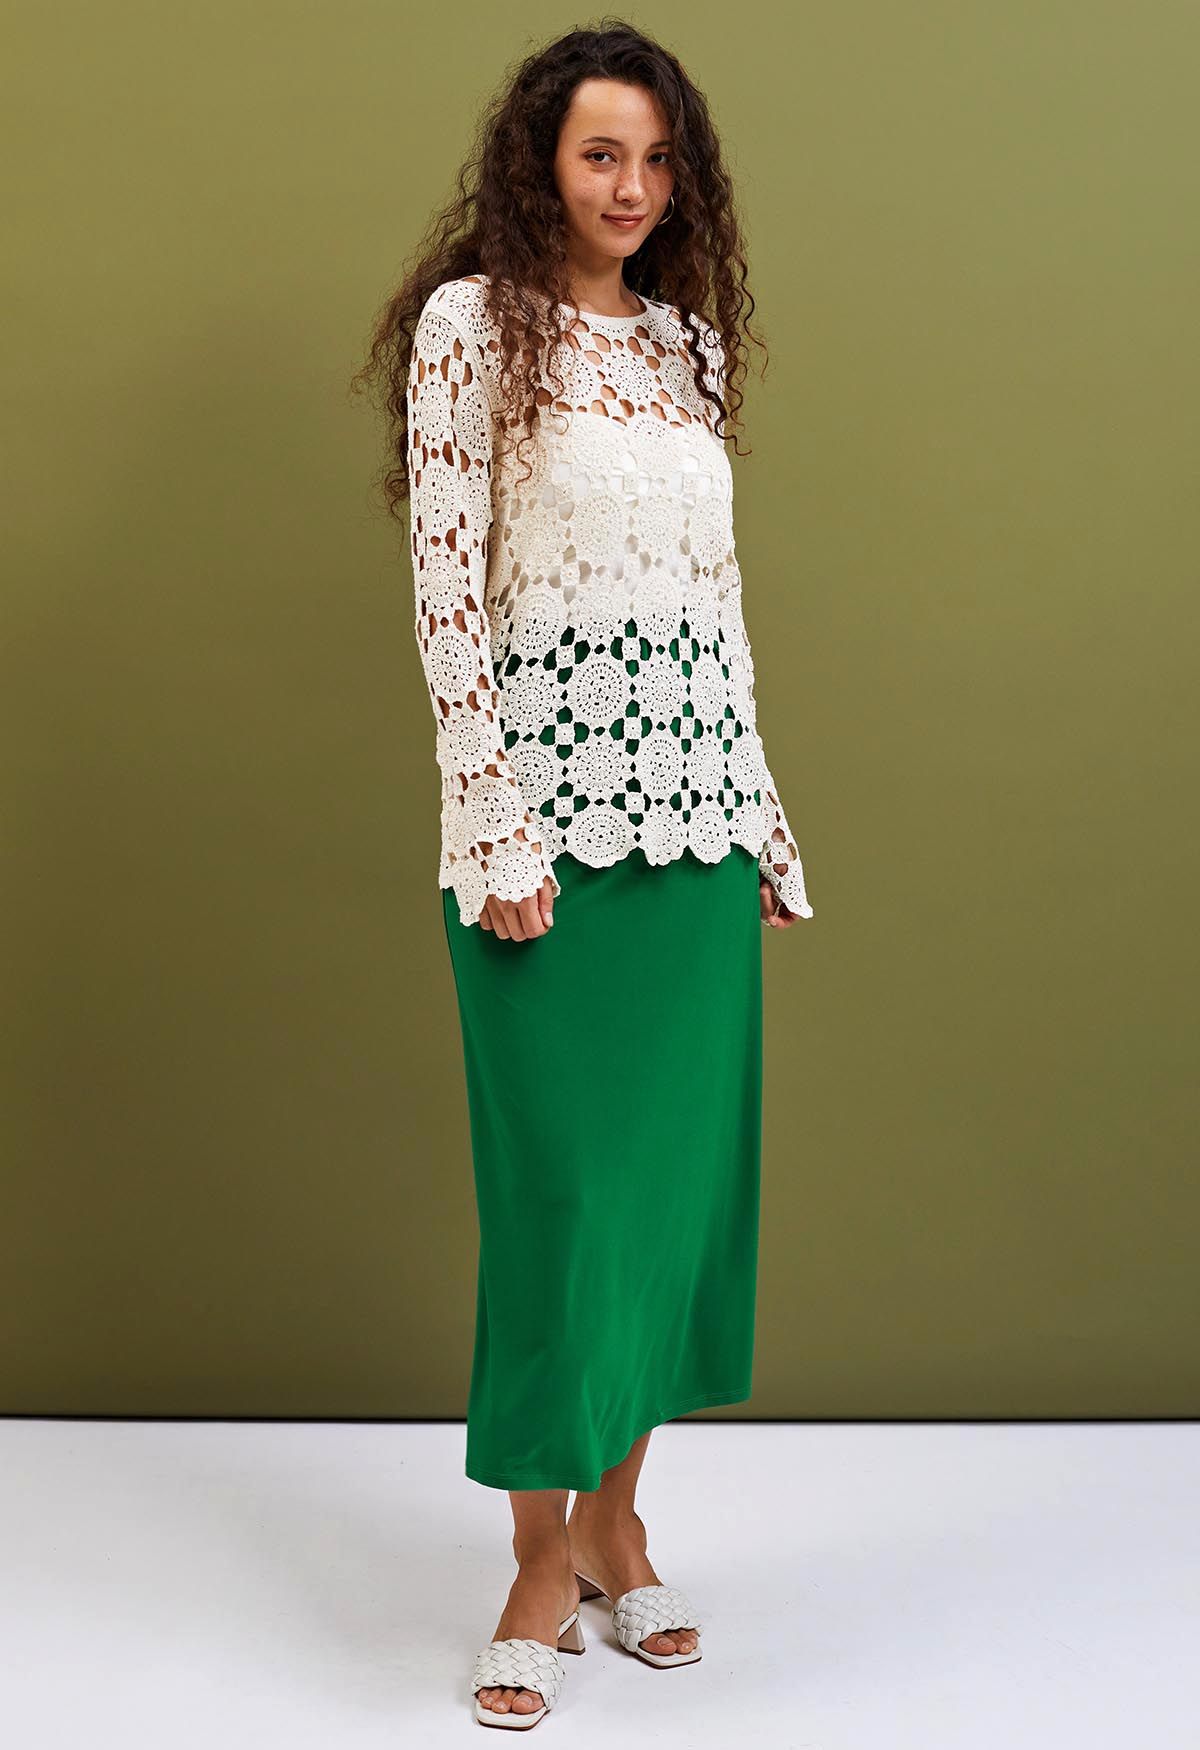 Relaxed Floral and Check Crochet Top in White